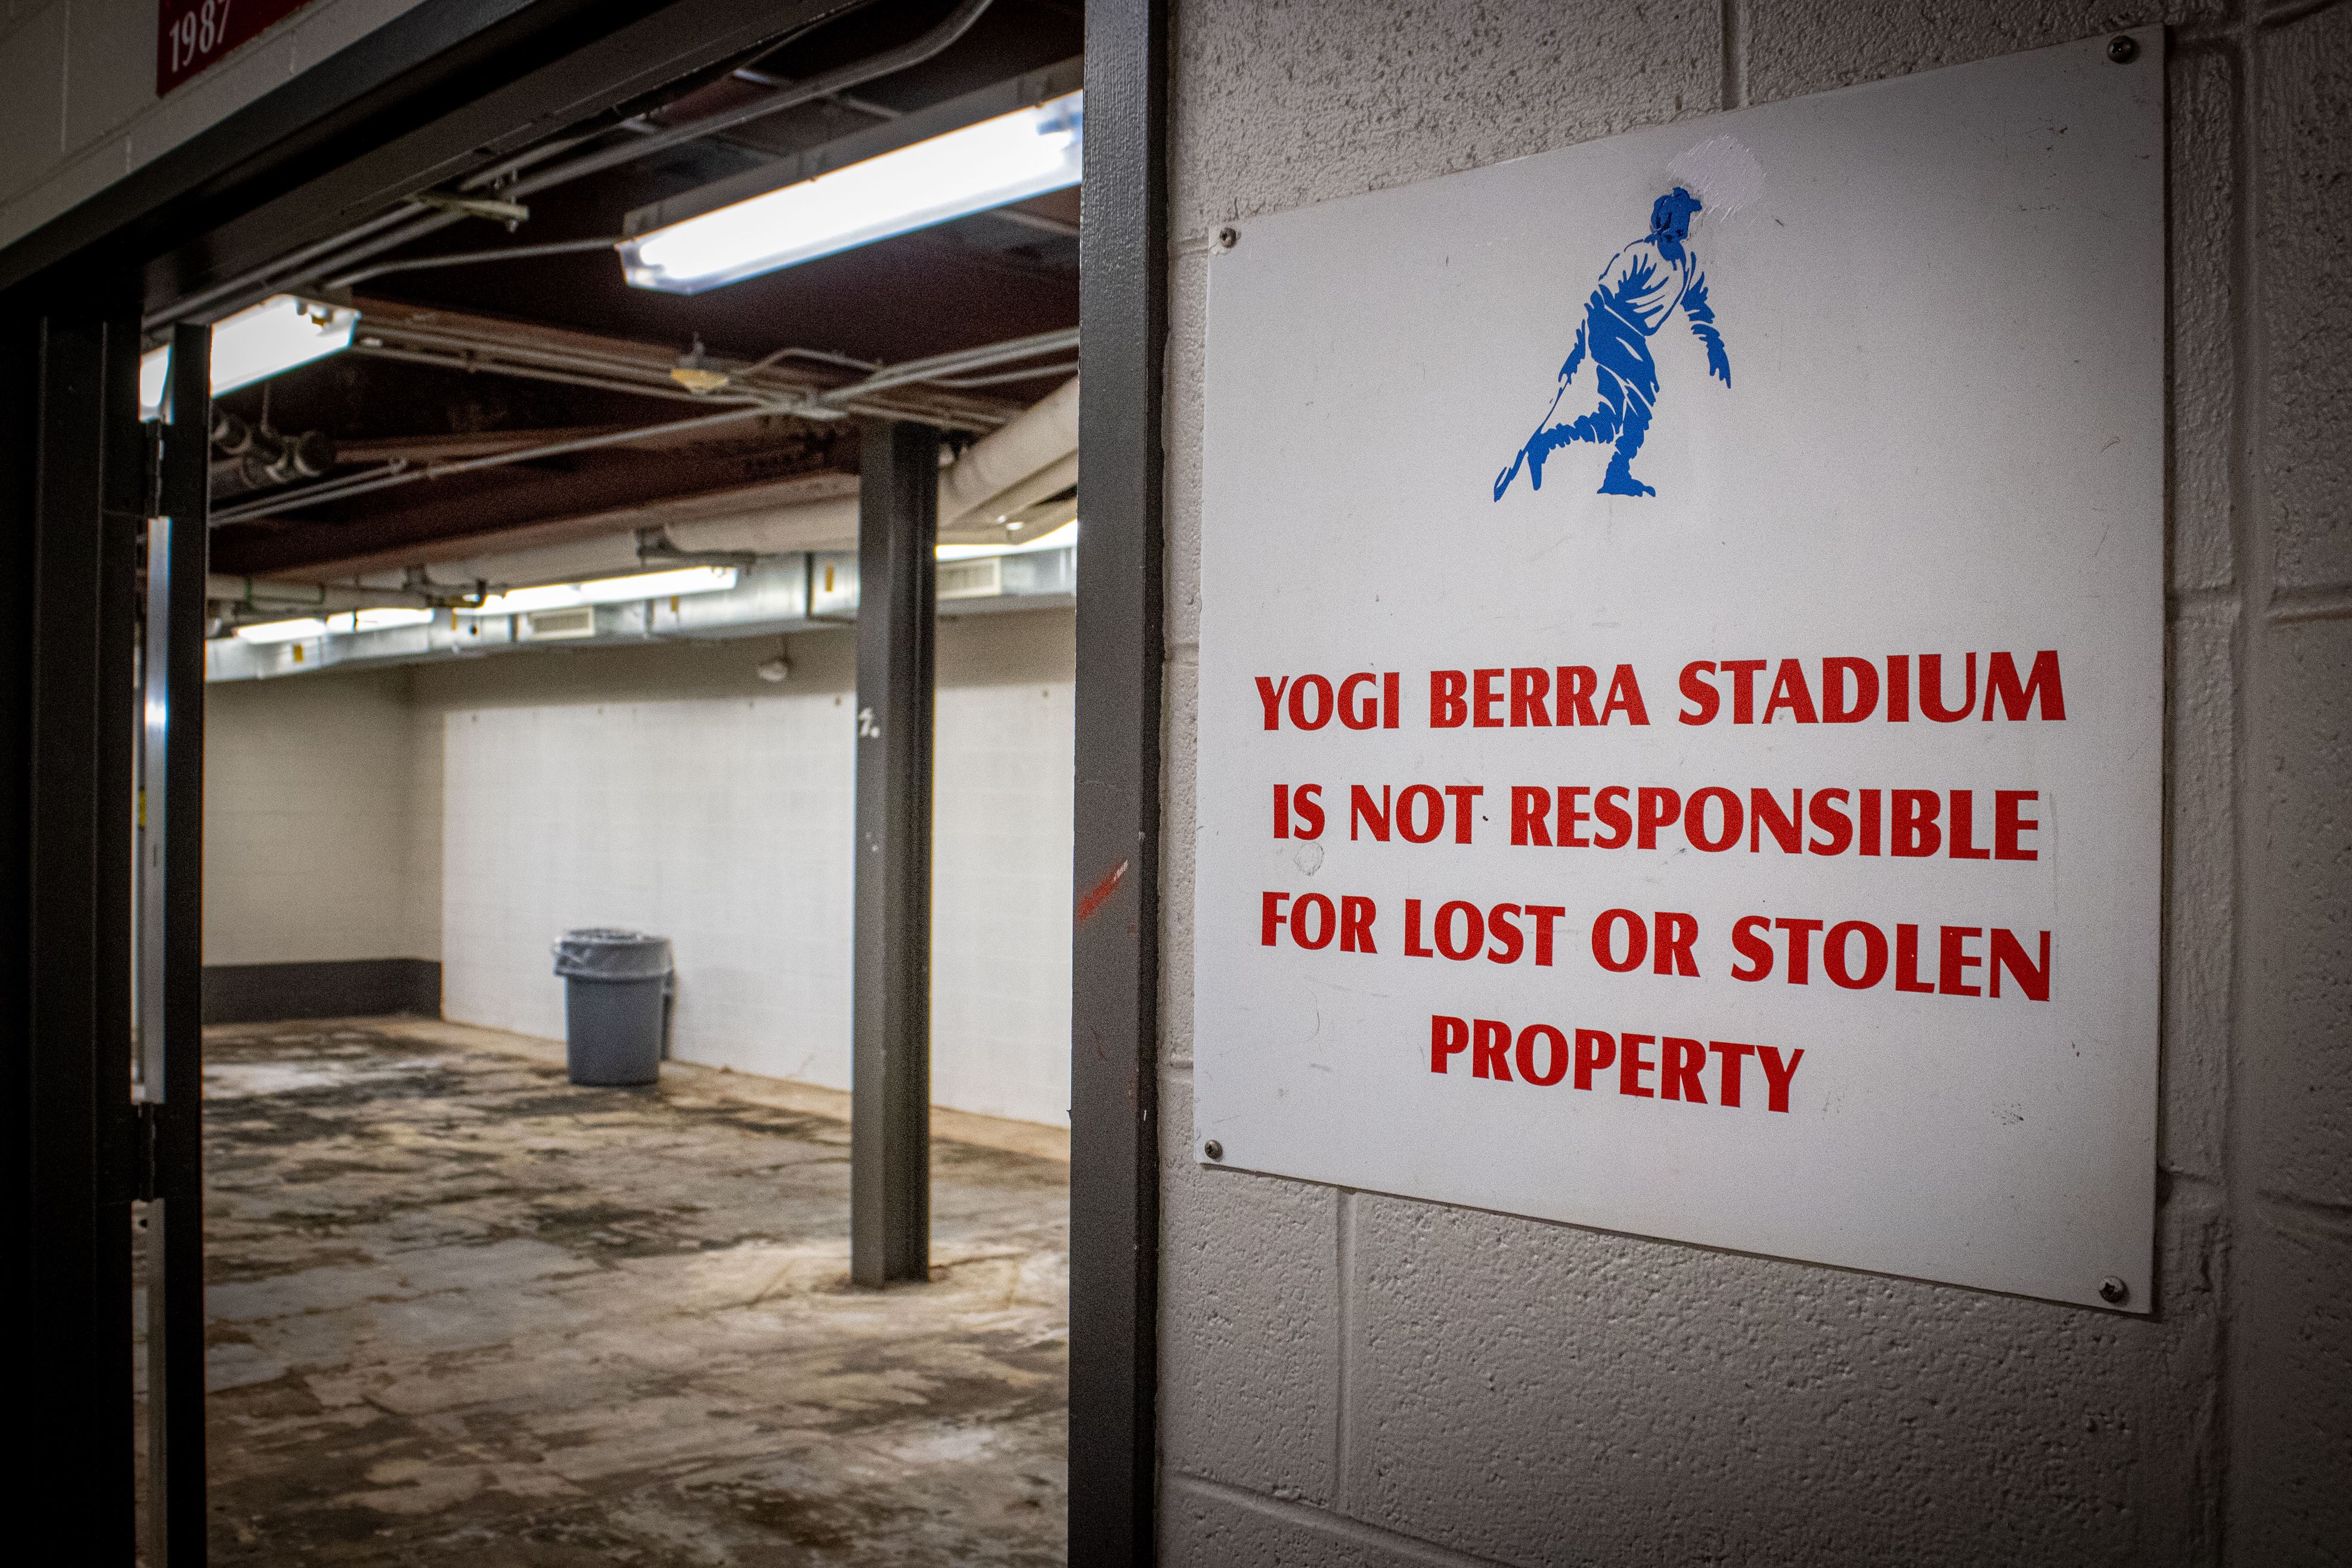 Yogi Berra Stadium's dugout and locker rooms, currently under renovation are expected to be complete by the end of this year.